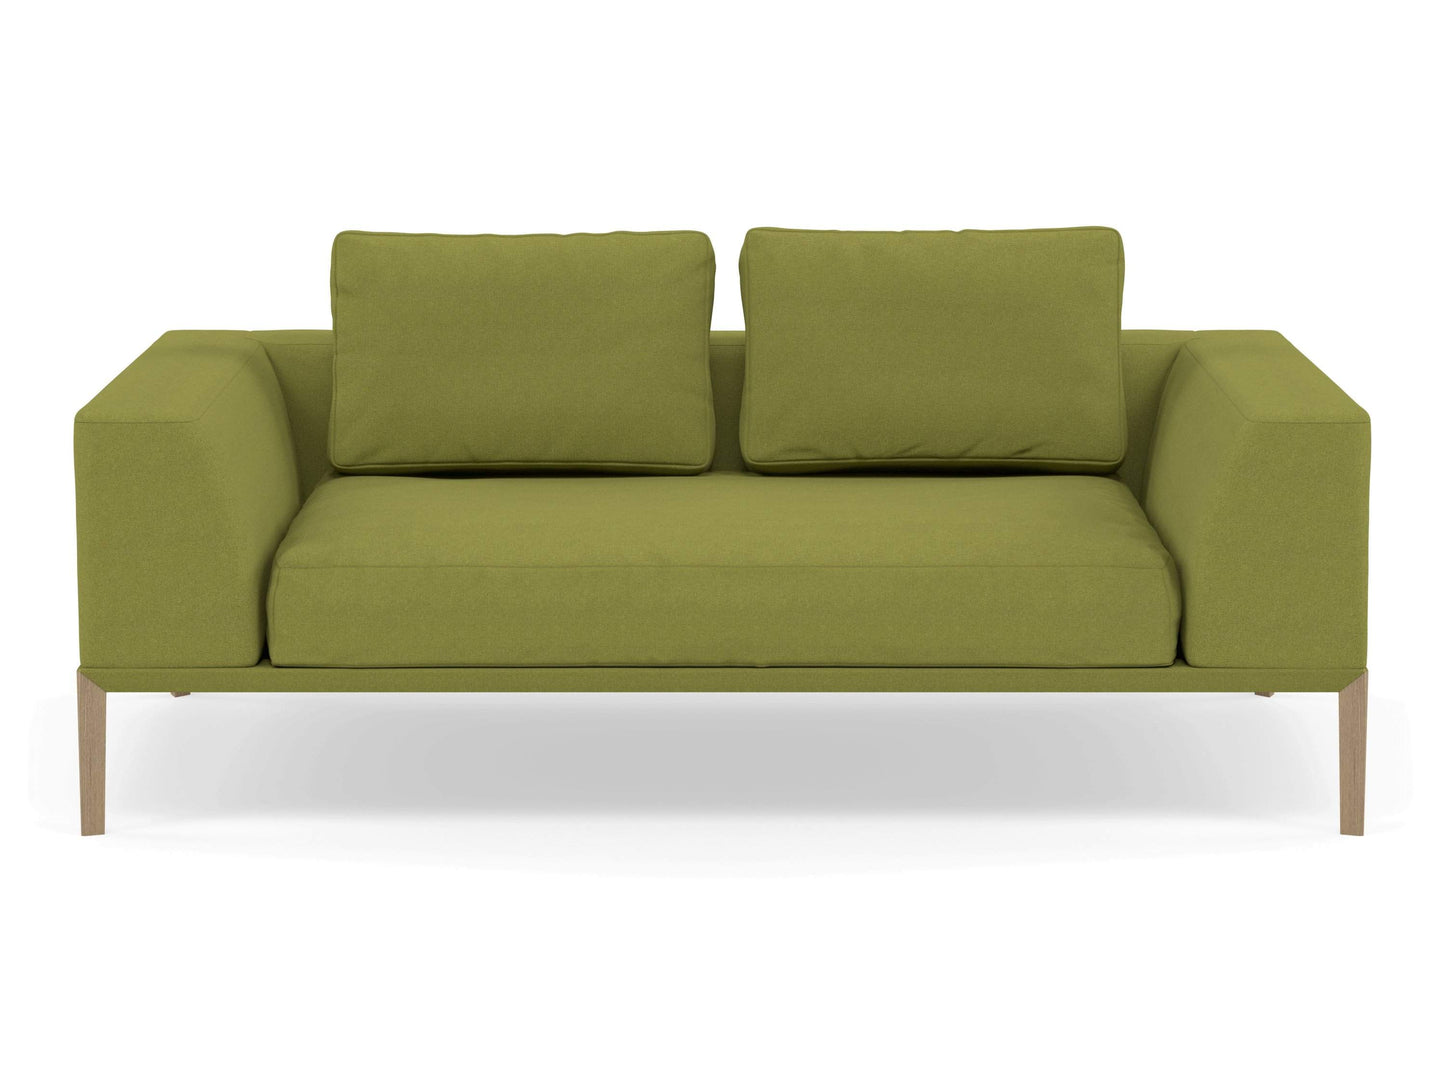 Modern 2 Seater Sofa with 2 Armrests in Lime Green Fabric-Natural Oak-Distinct Designs (London) Ltd